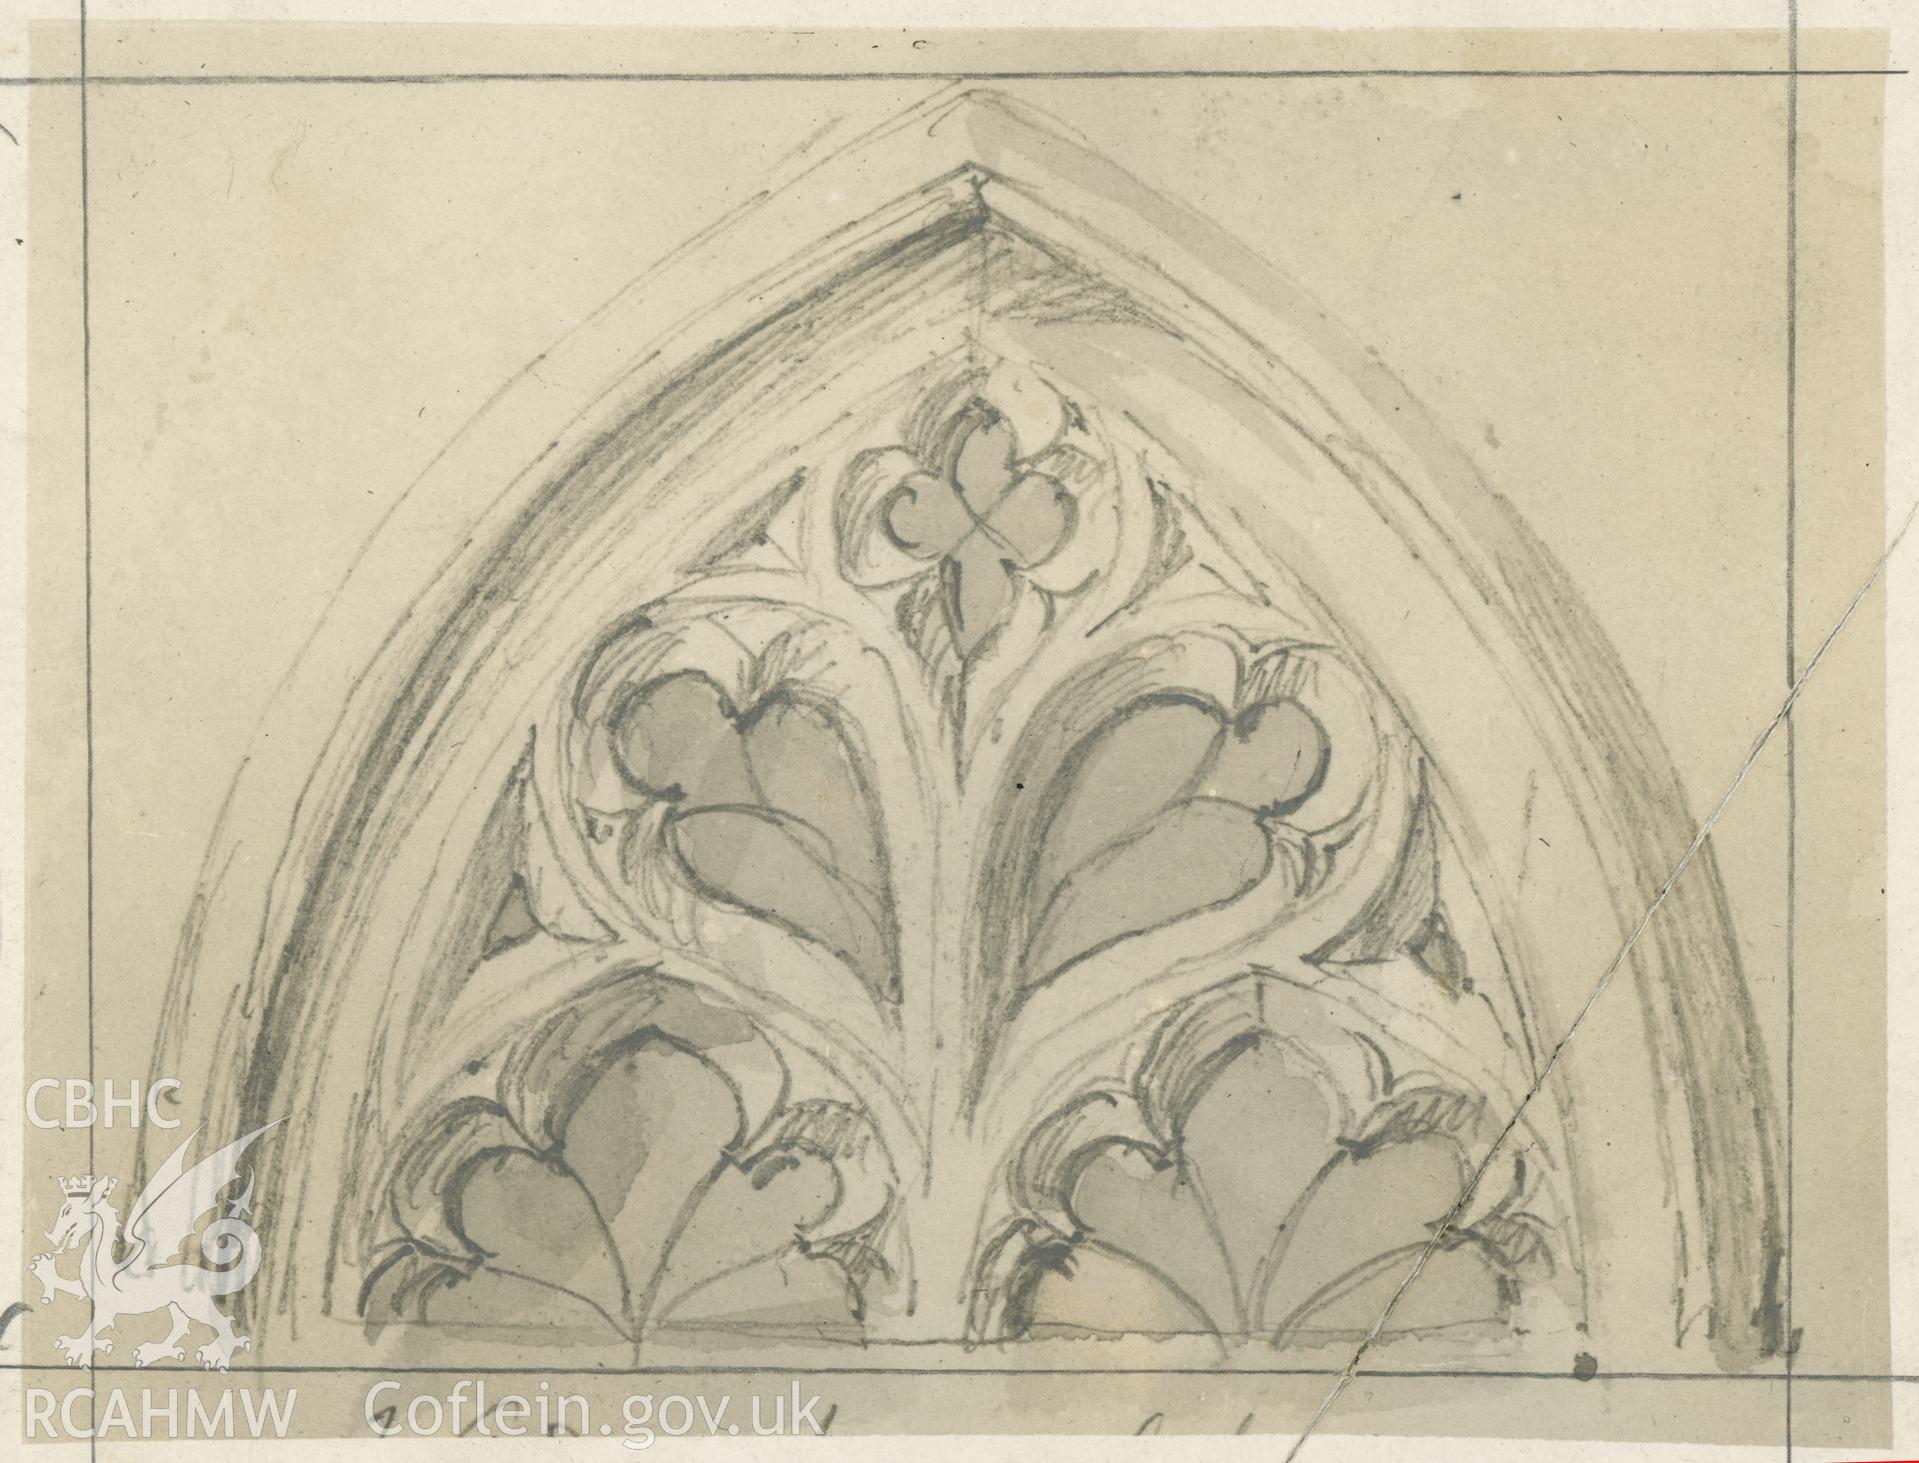 Pencil sketch showing detail of archway at Valle Crucis Abbey.